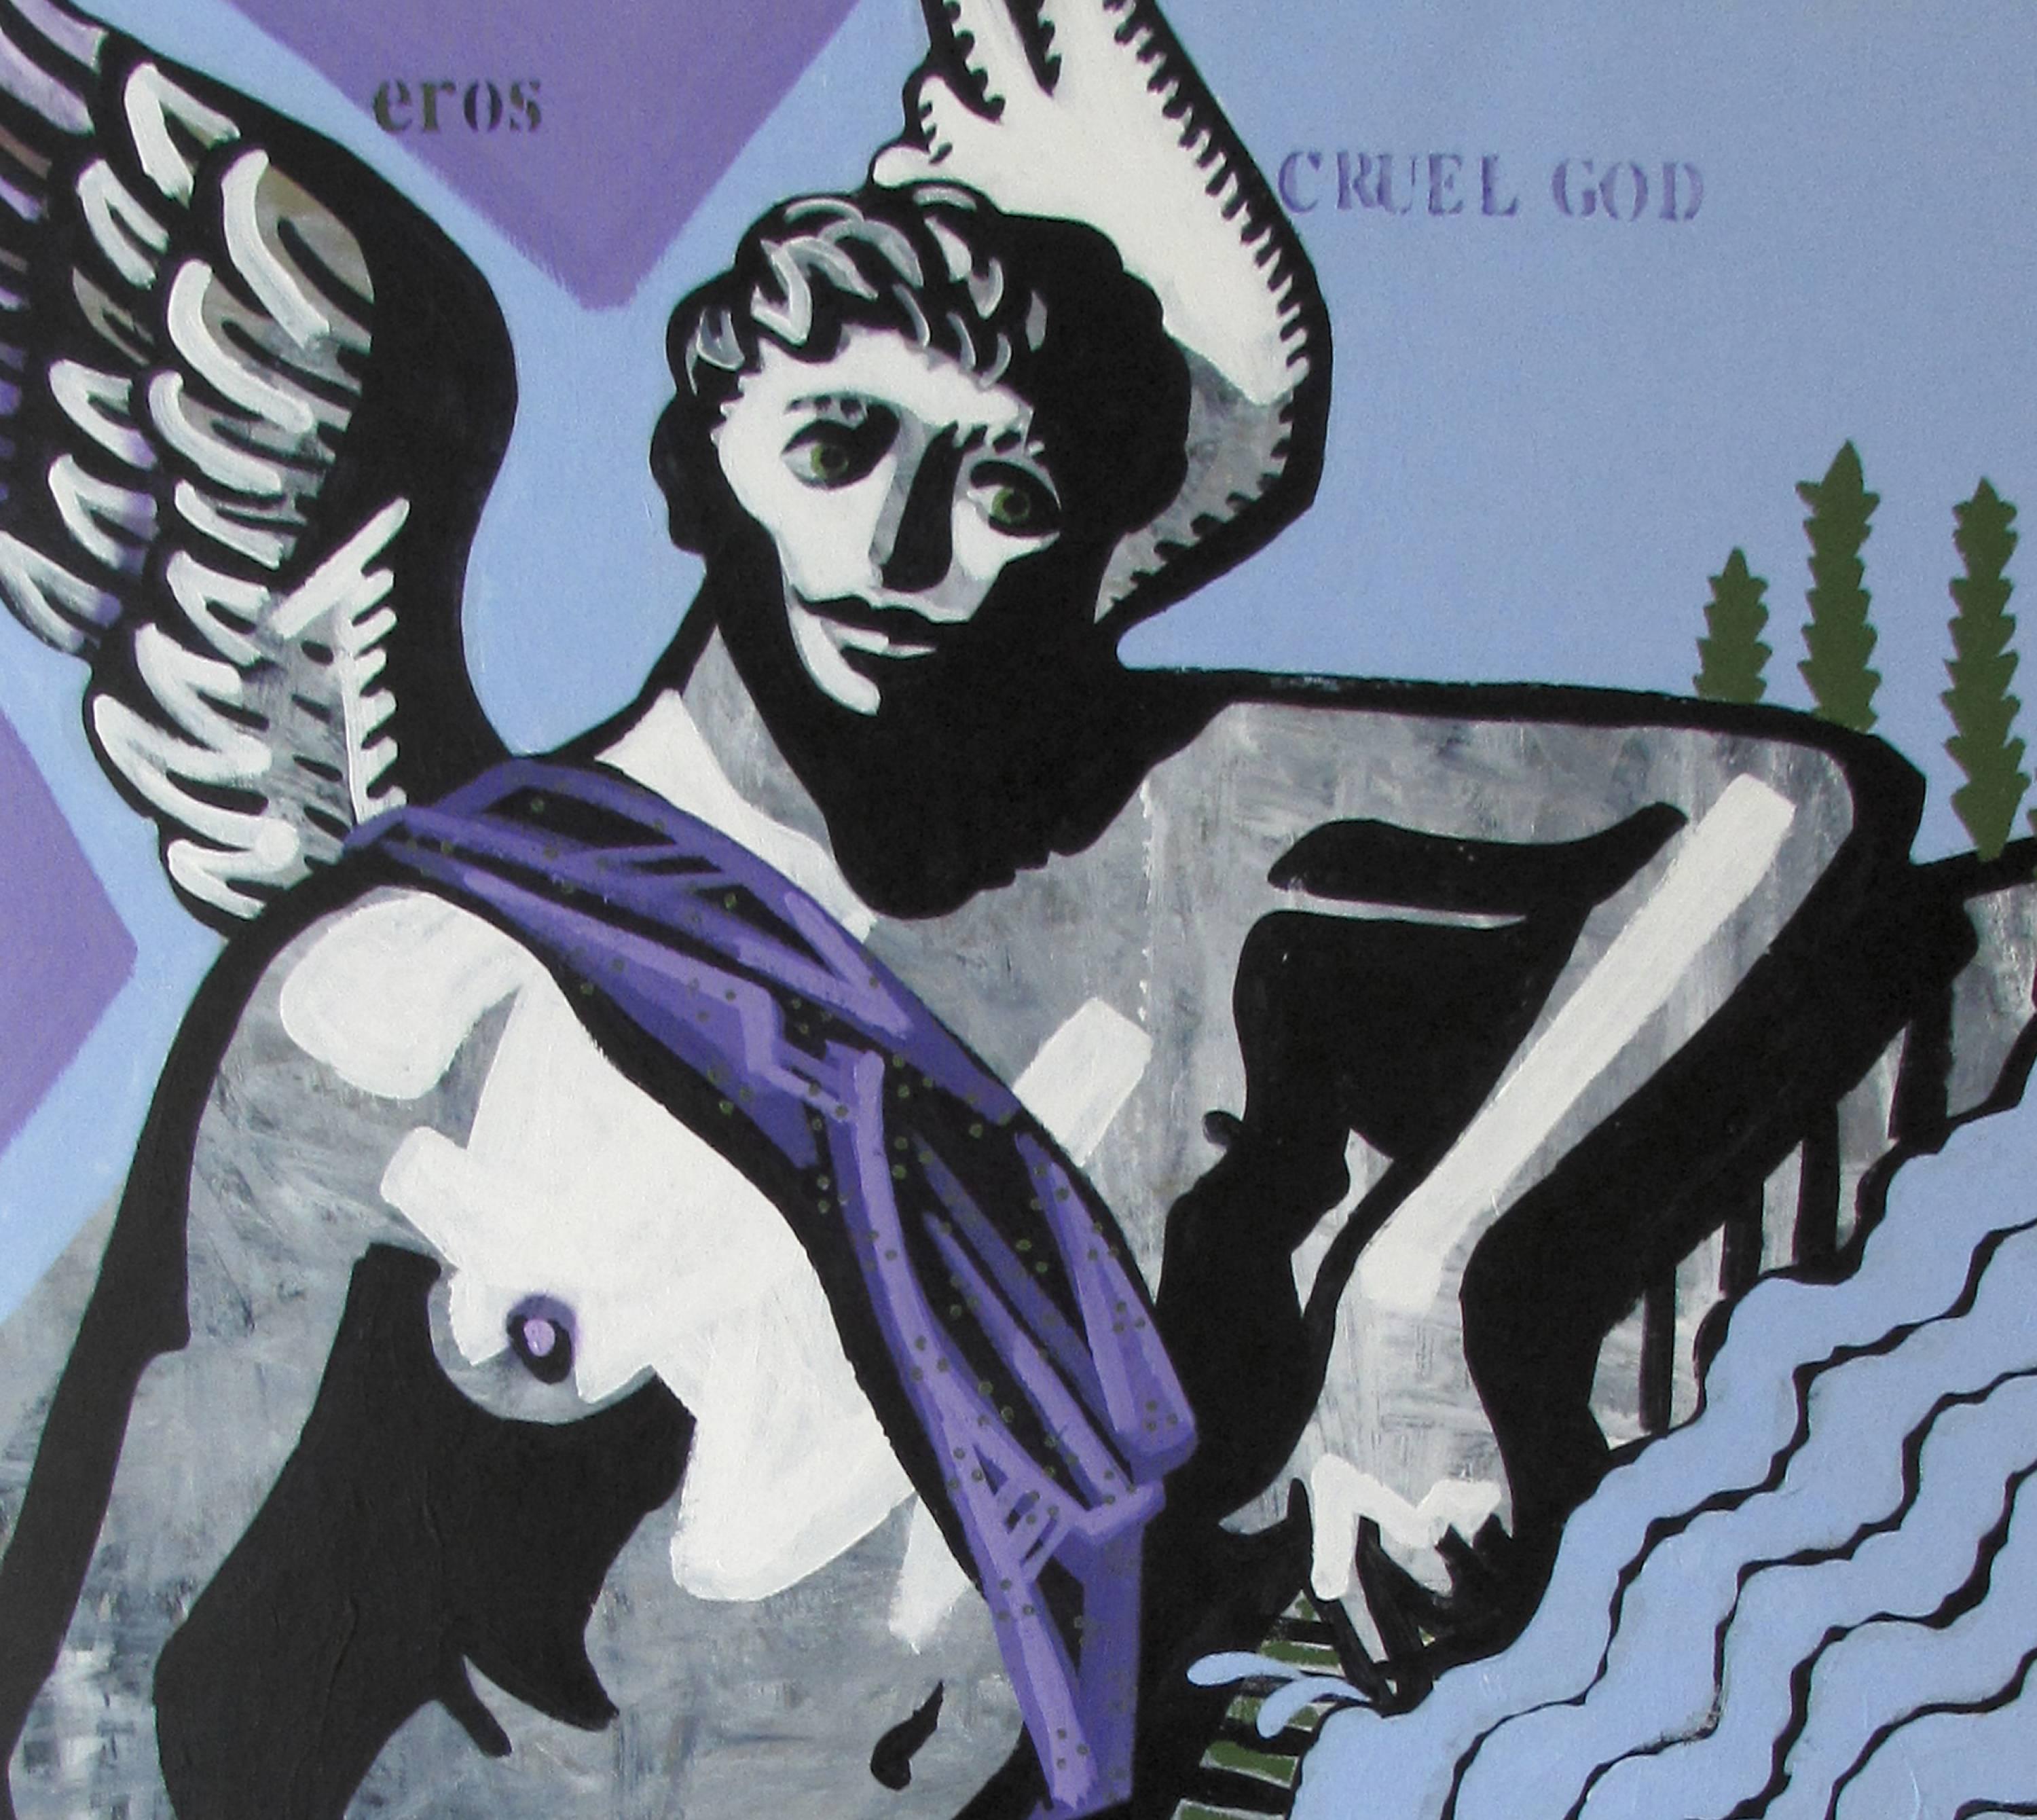 Eros Cruel God, 2018
Acrylic on canvas (Signed front right corner)
82.67 H × 47.24 W in
210 H × 120 W cm

The artist reinterprets the myths of Apollo and Daphne from Greek Mythology. 
Apollo, the god of light, day, and art, insults the god of love,